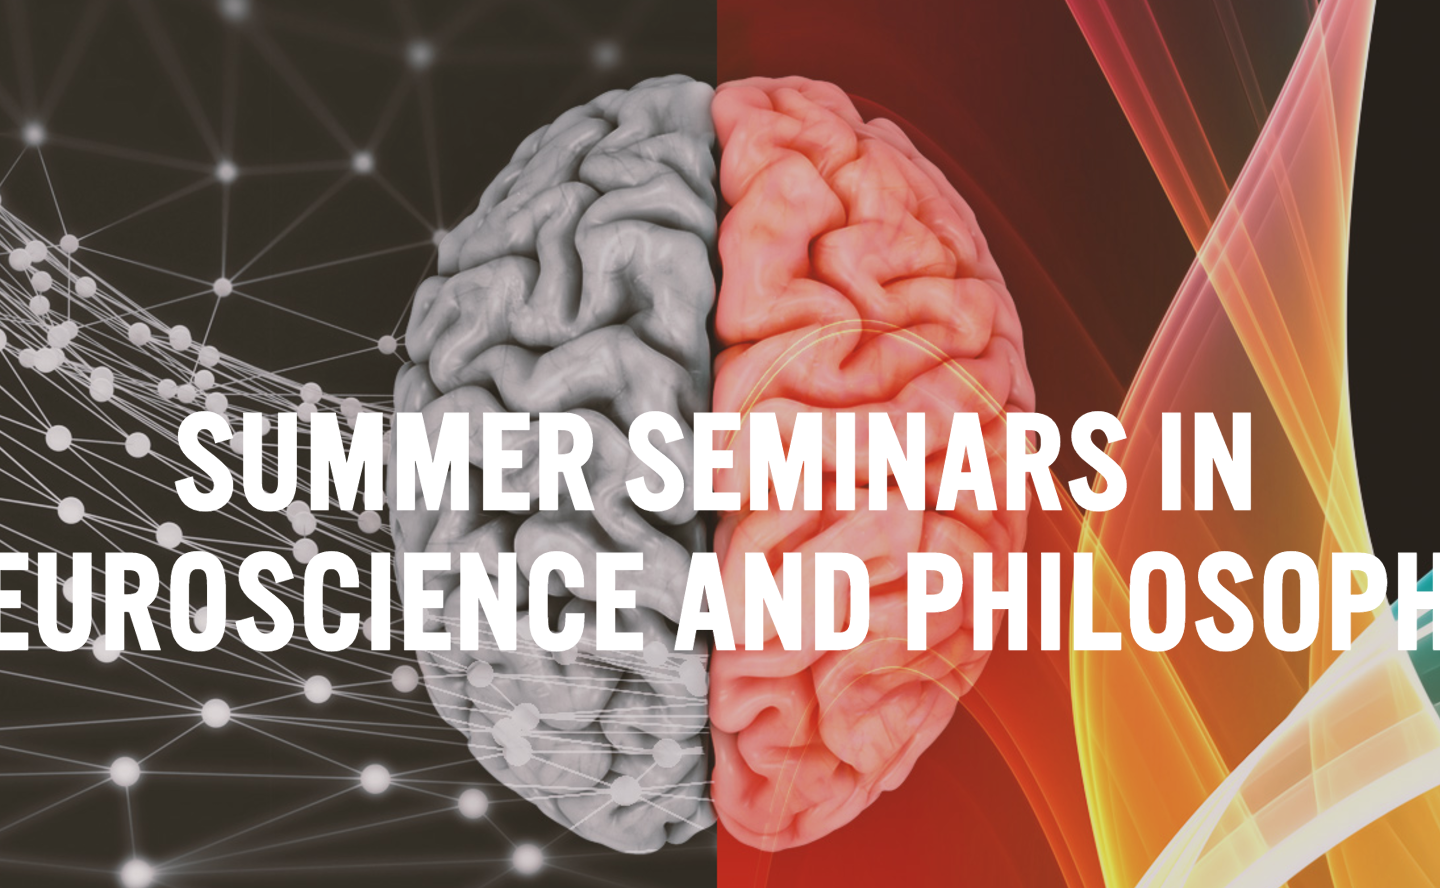 Applications are open for the 2017 Summer Seminars in Neuroscience and Philosophy